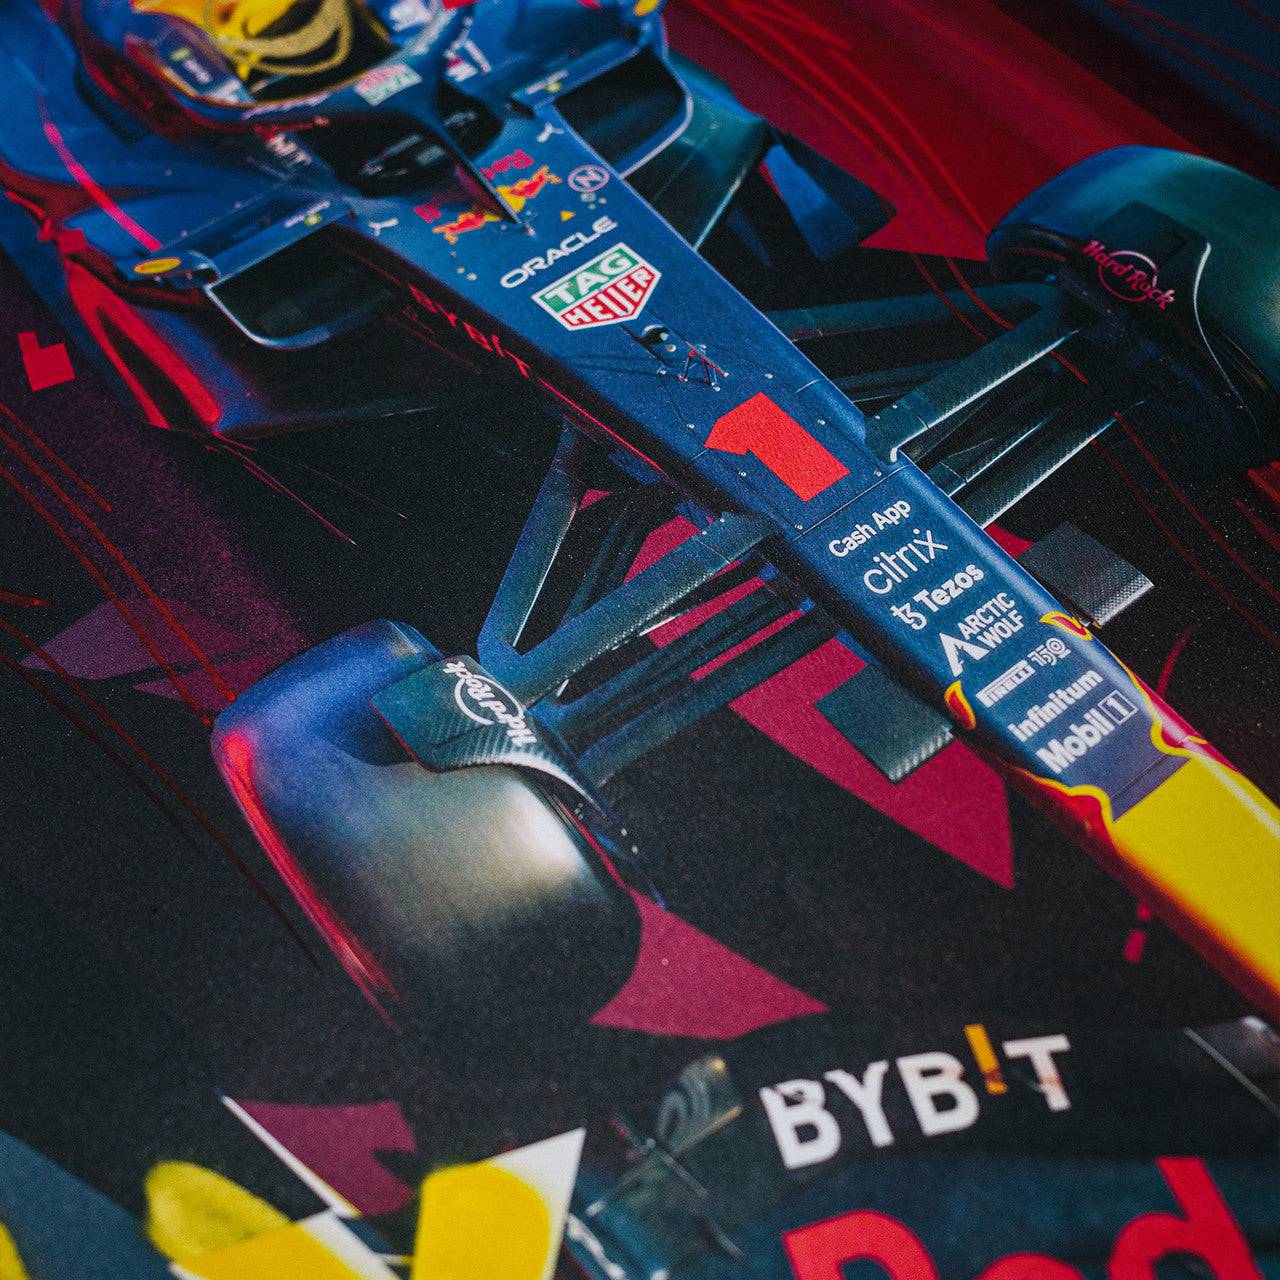 Oracle Red Bull Racing - Max Verstappen - Art to the Max - 2022 | Art Edition | #24/25